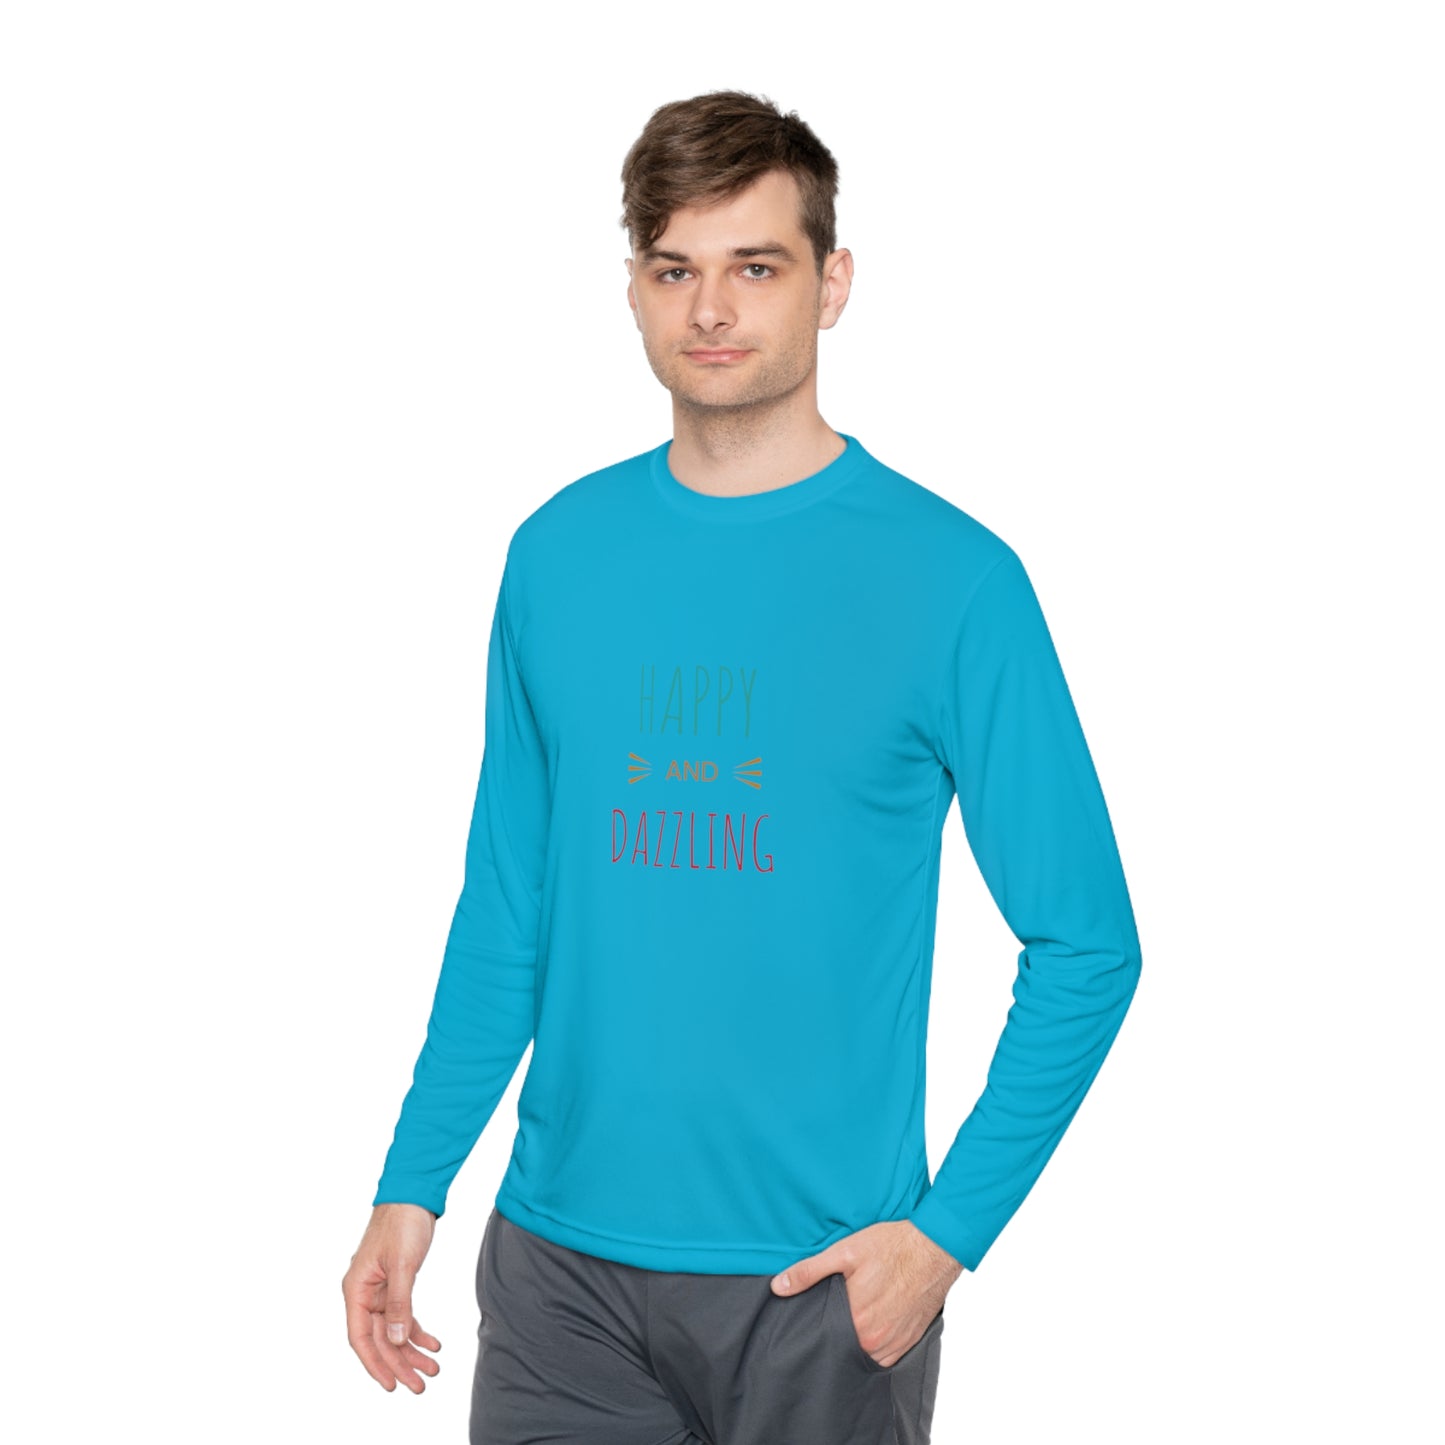 Happy and Dazzling Unisex Lightweight Long Sleeve Tee*